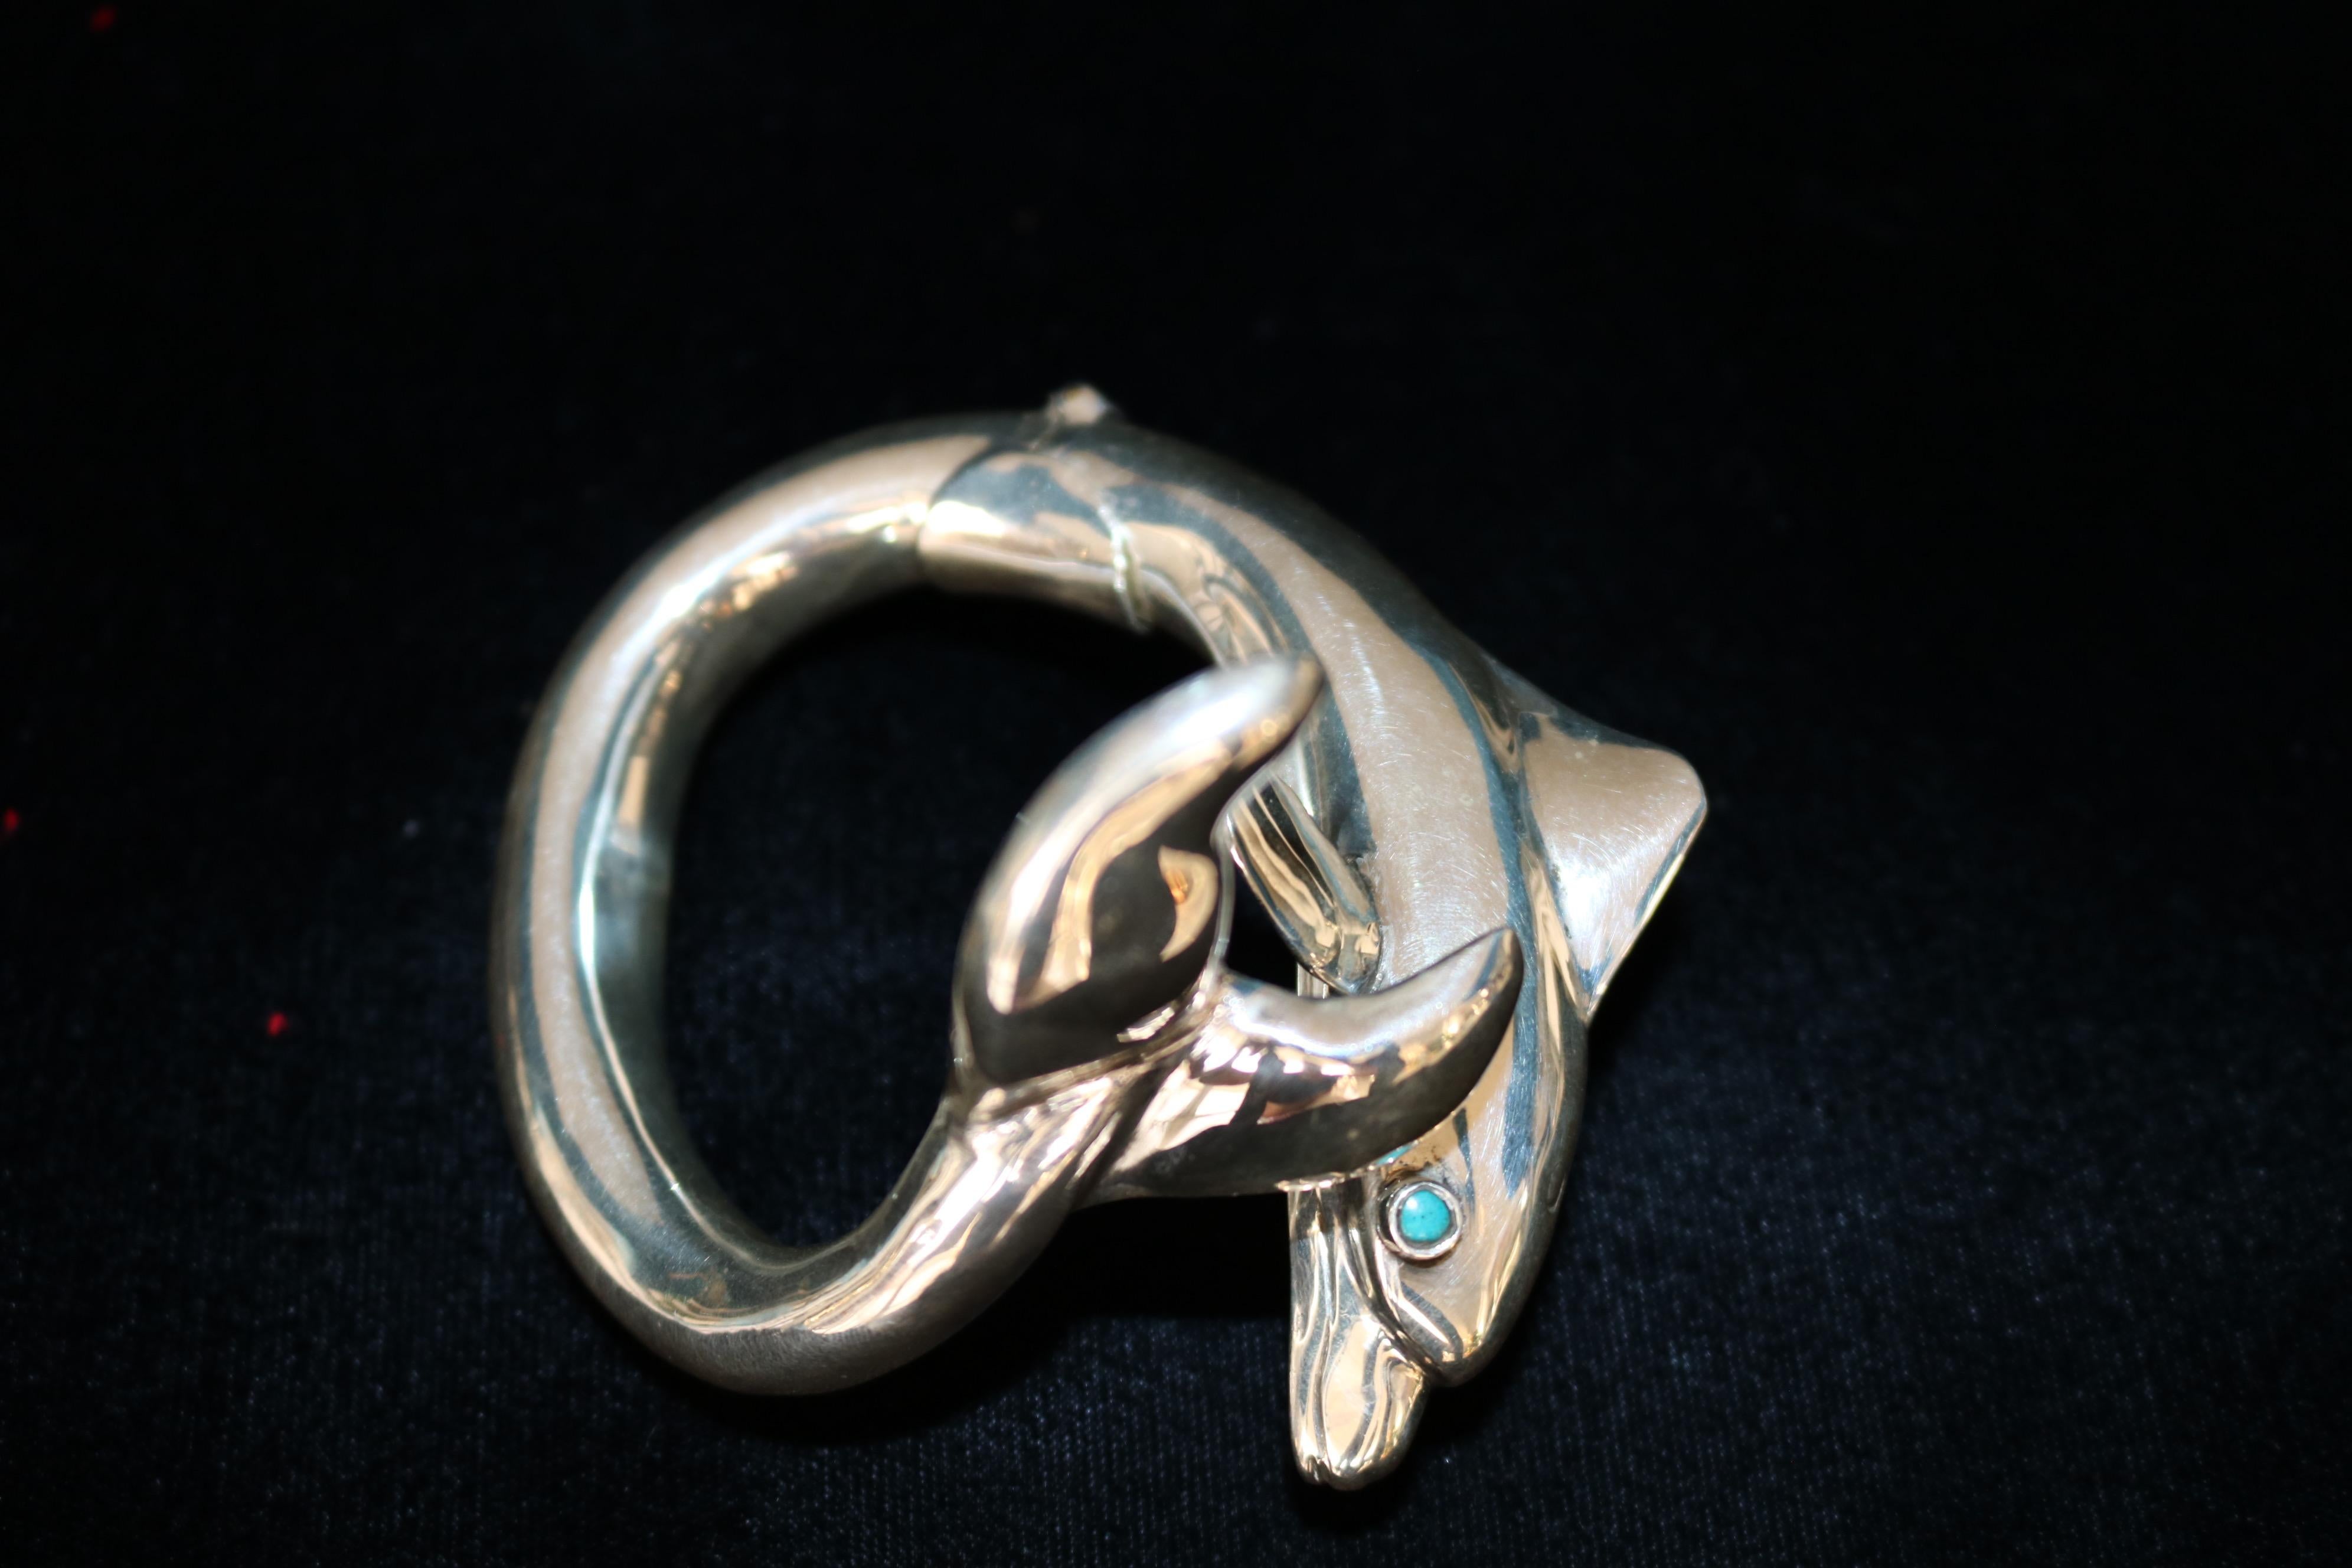 This Dolphin Bangle Bracelet was beautifully handcrafted with the highest quality of 950 Sterling silver.
This piece on your wrist will not go unnoticed. As one of our favorite pieces of our animal collection finished with a silky polished ; the